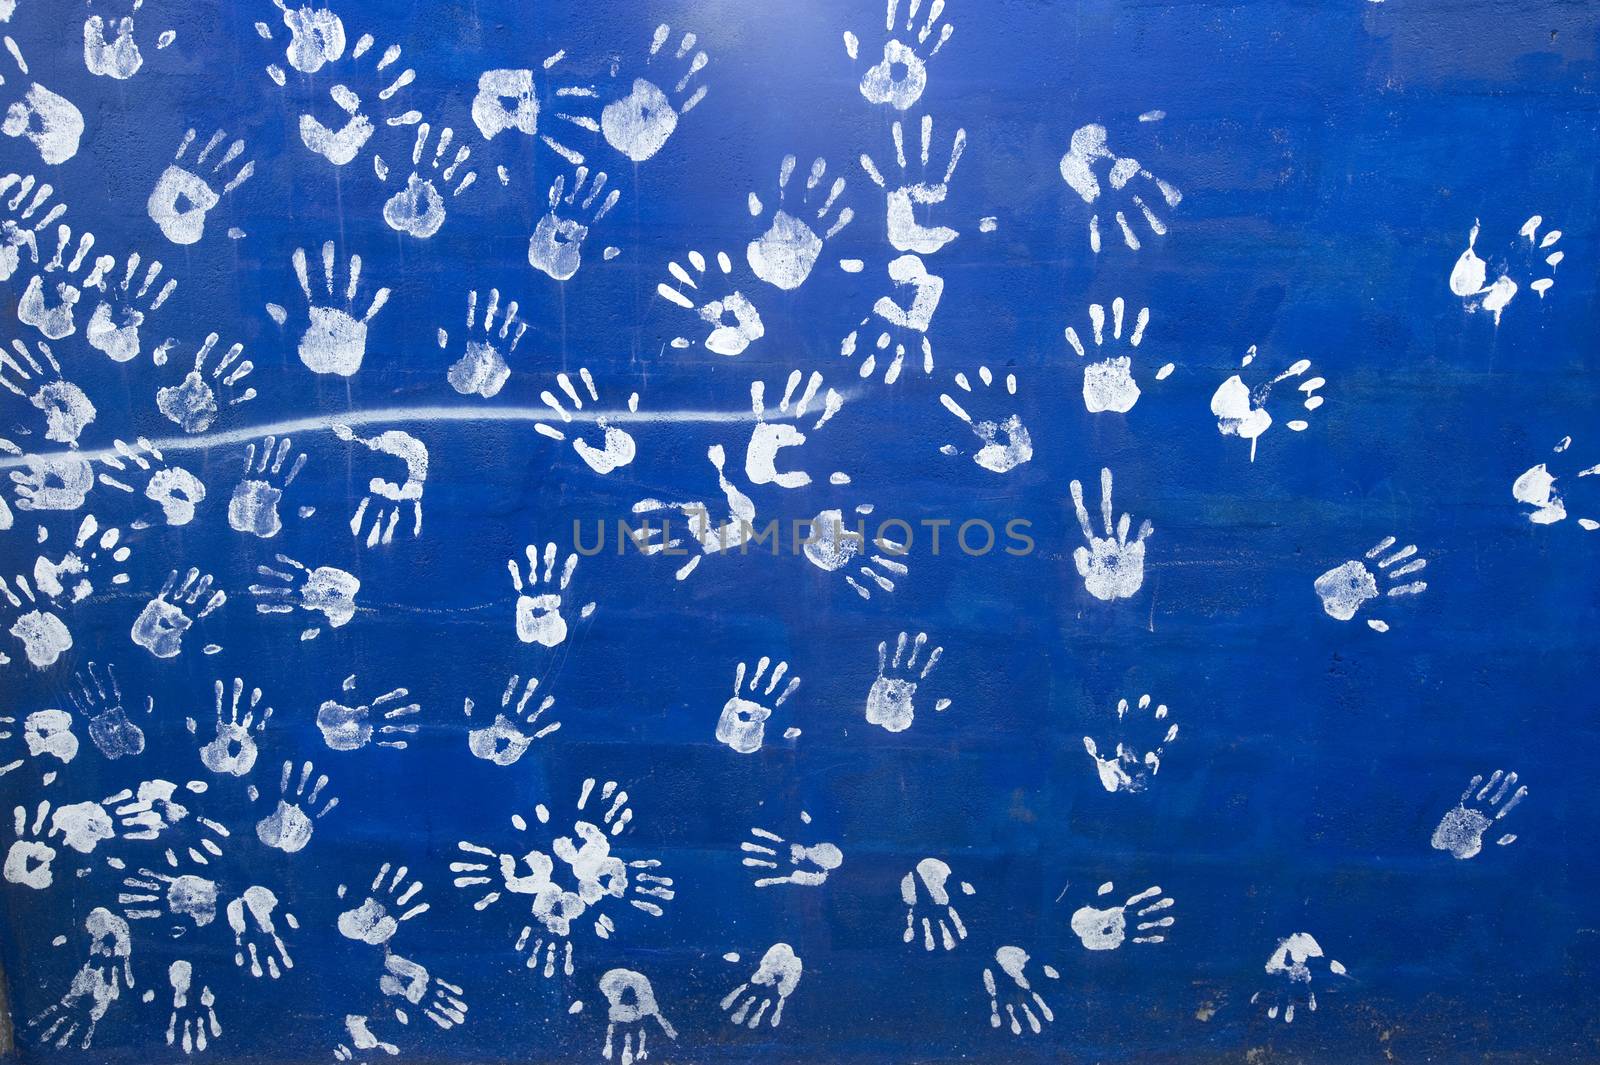 white handprints on a blue wall by think4photop